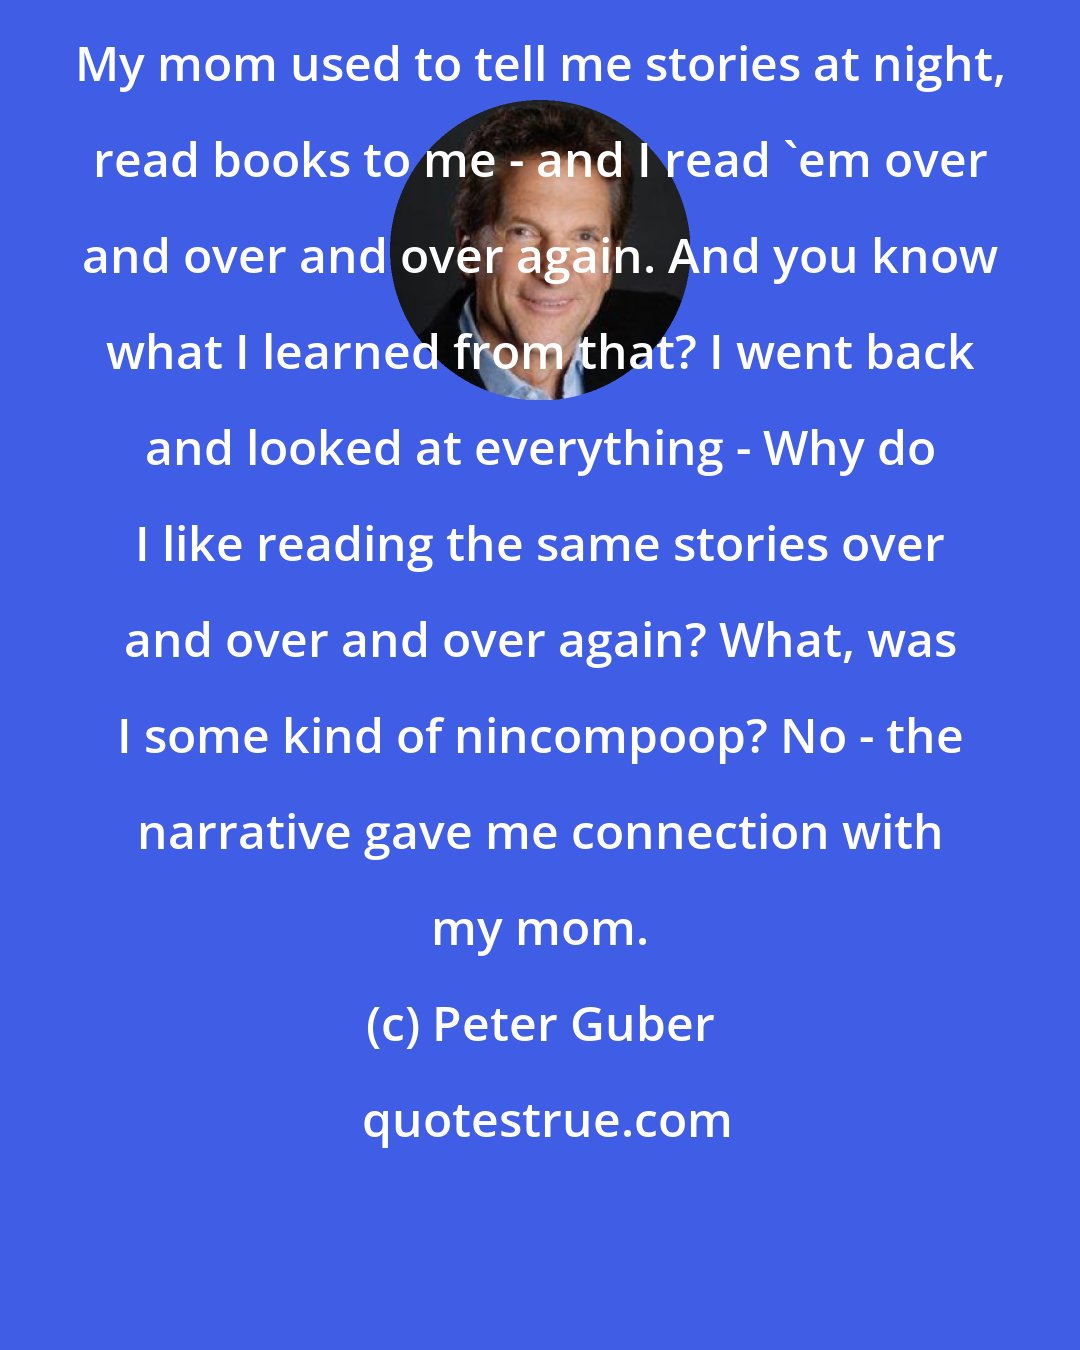 Peter Guber: My mom used to tell me stories at night, read books to me - and I read 'em over and over and over again. And you know what I learned from that? I went back and looked at everything - Why do I like reading the same stories over and over and over again? What, was I some kind of nincompoop? No - the narrative gave me connection with my mom.